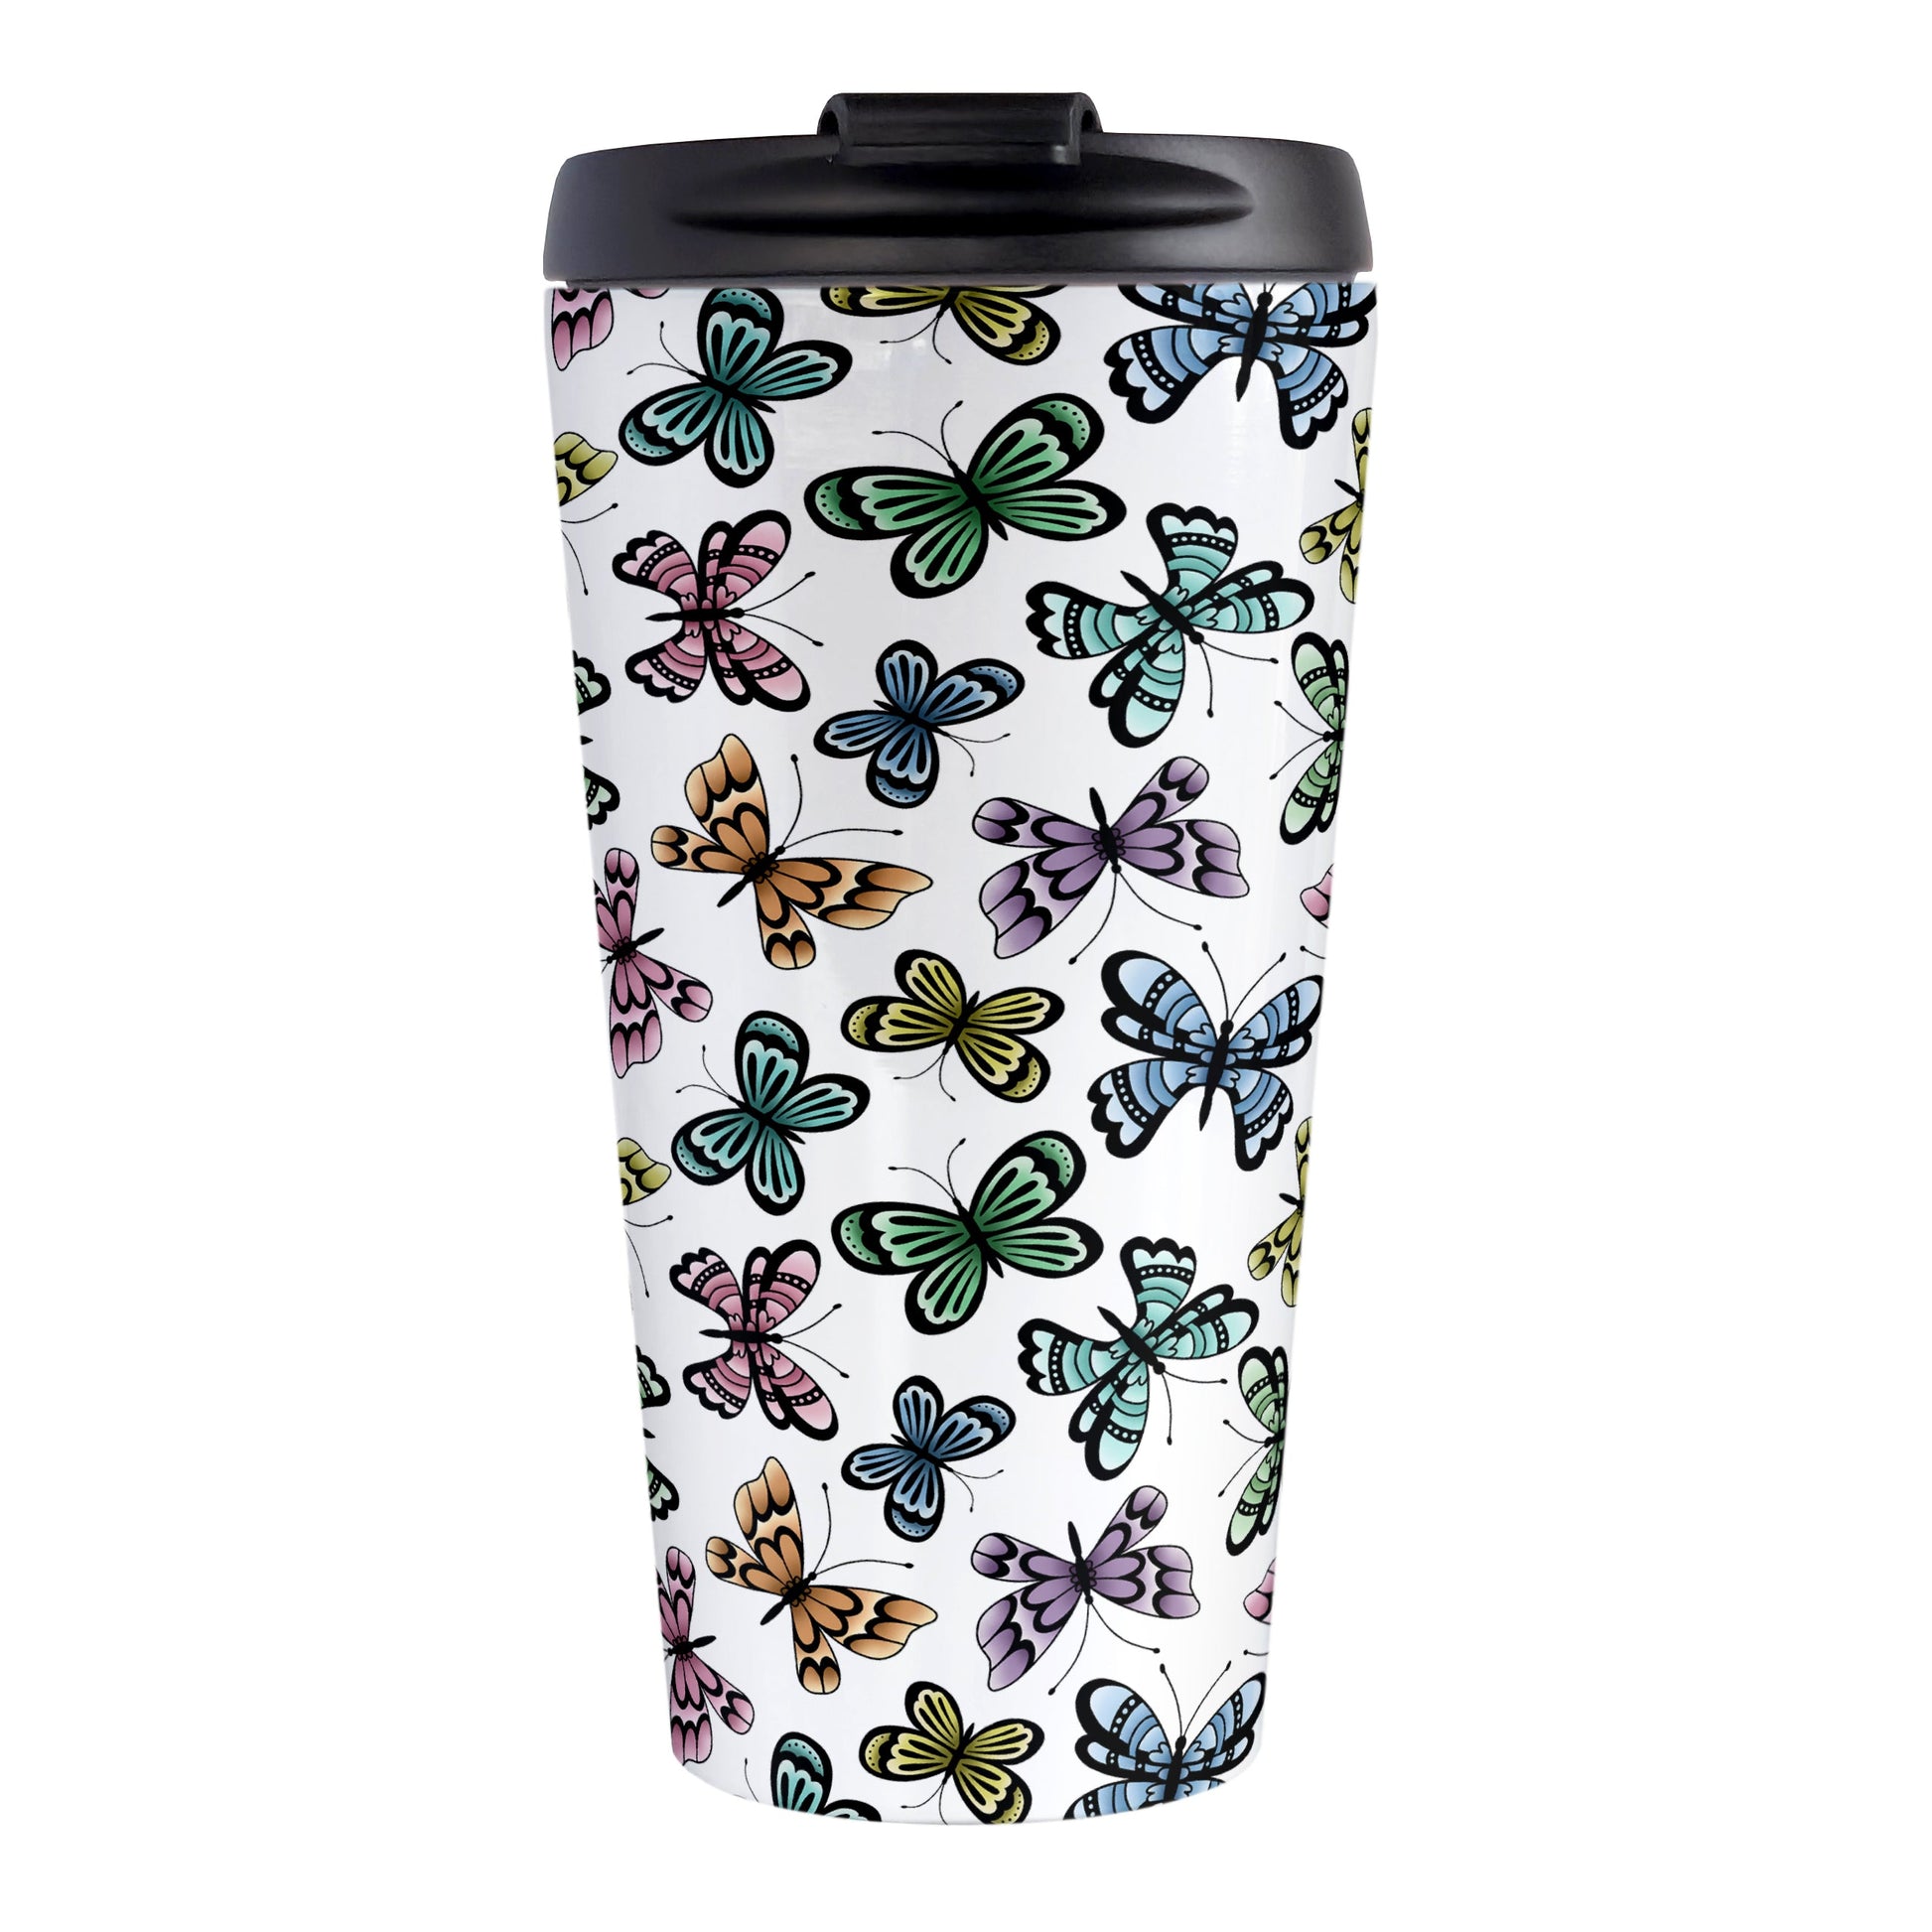 Pretty Butterfly Pattern Travel Mug (15oz) at Amy's Coffee Mugs. A stainless steel travel mug designed with pretty and colorful butterflies in a pattern that wraps around the mug. This travel mug is perfect for people who love butterflies and colorful nature designs. 